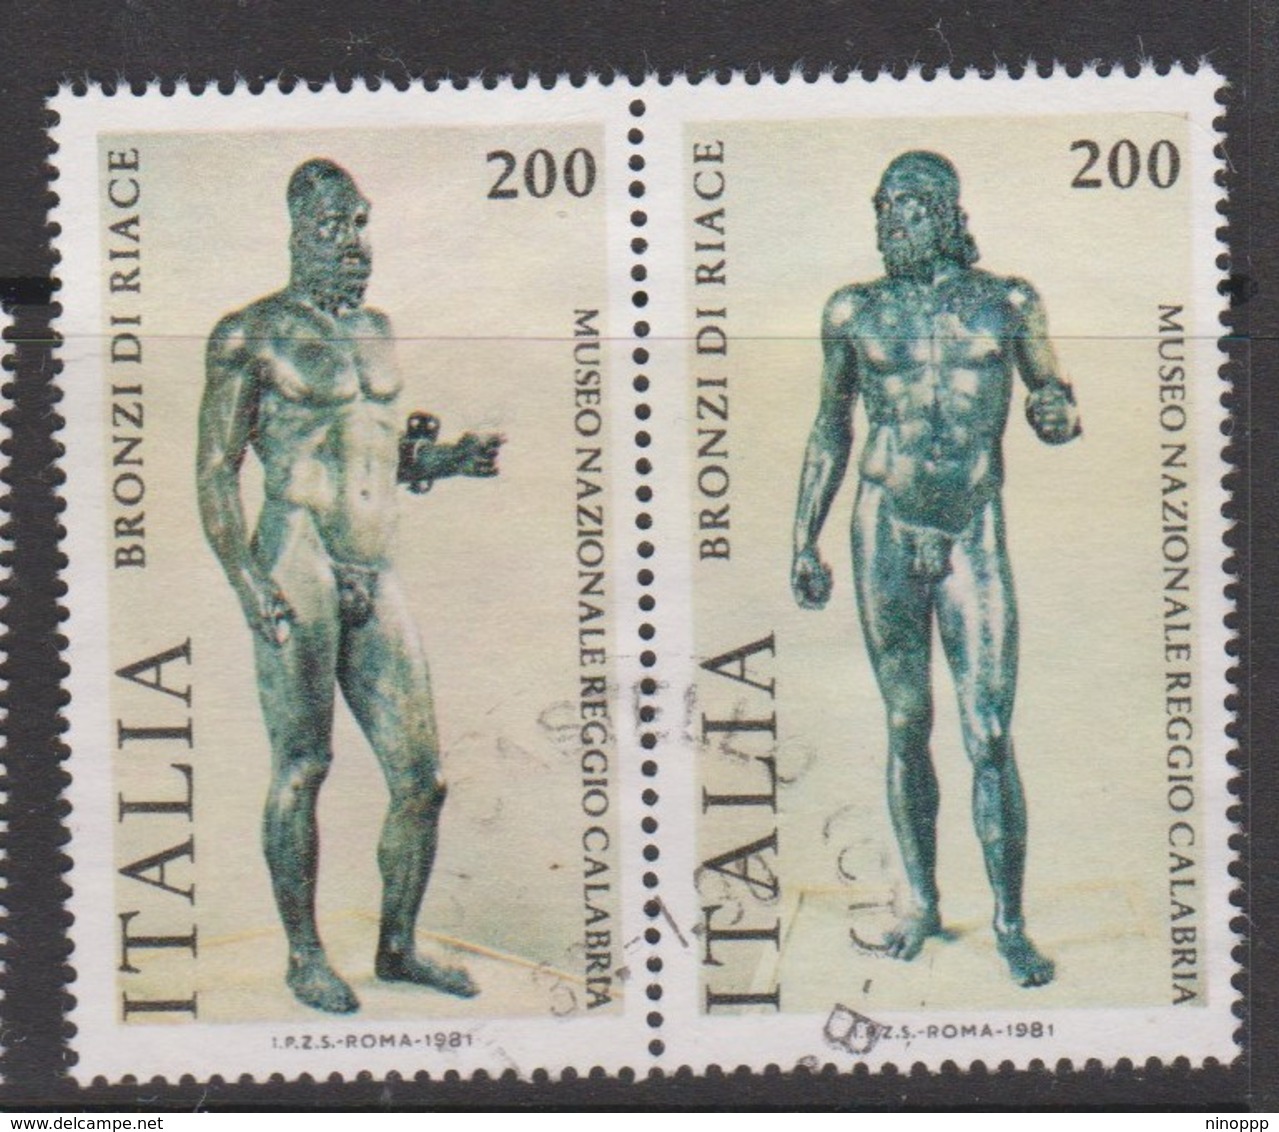 Italy Republic S 1573-1574 1981 Riace Bronzes ,used - 1971-80: Used